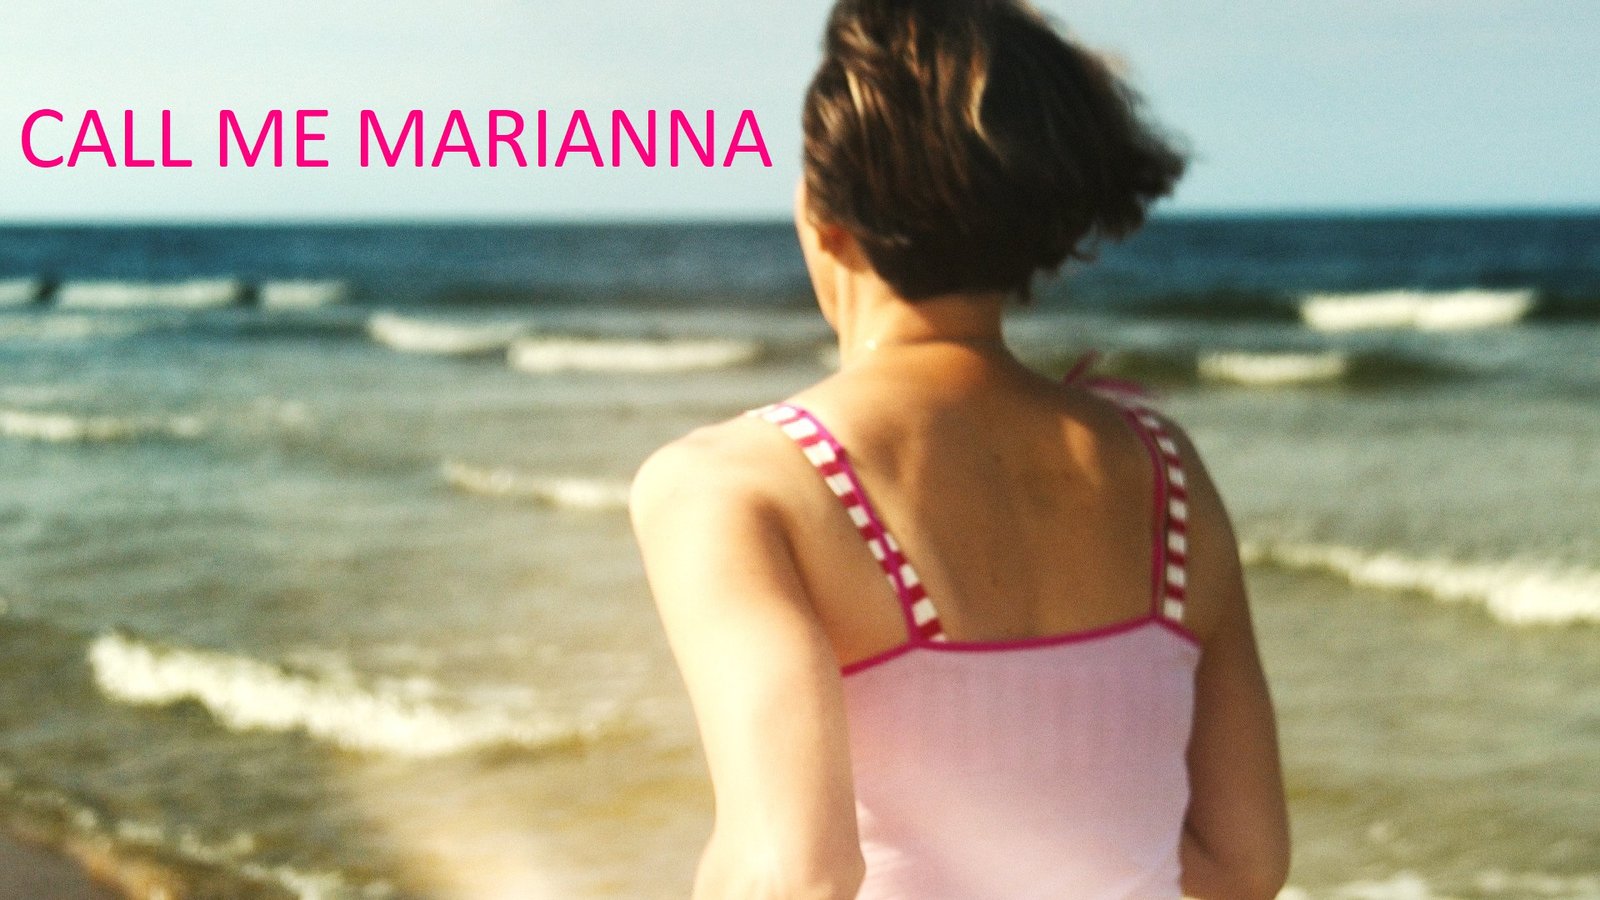 Call Me Marianna - Portrait of a Transgender Woman